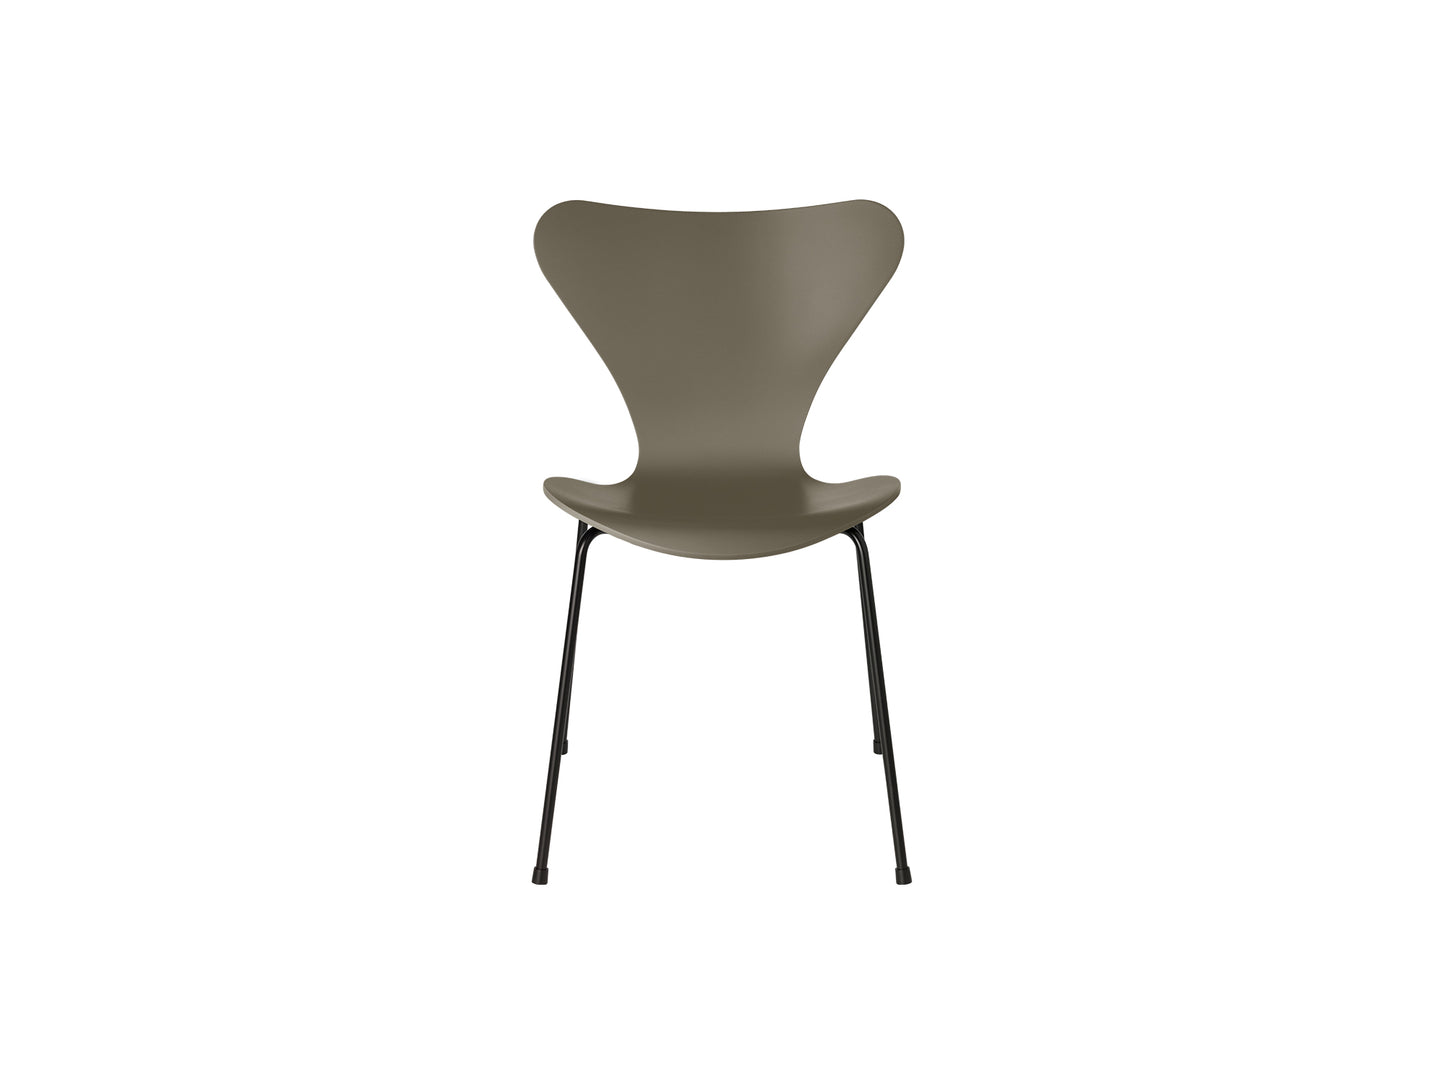 Series 7™ 3107 Dining Chair by Fritz Hansen - Olive Green Lacquered Veneer Shell / Black Steel